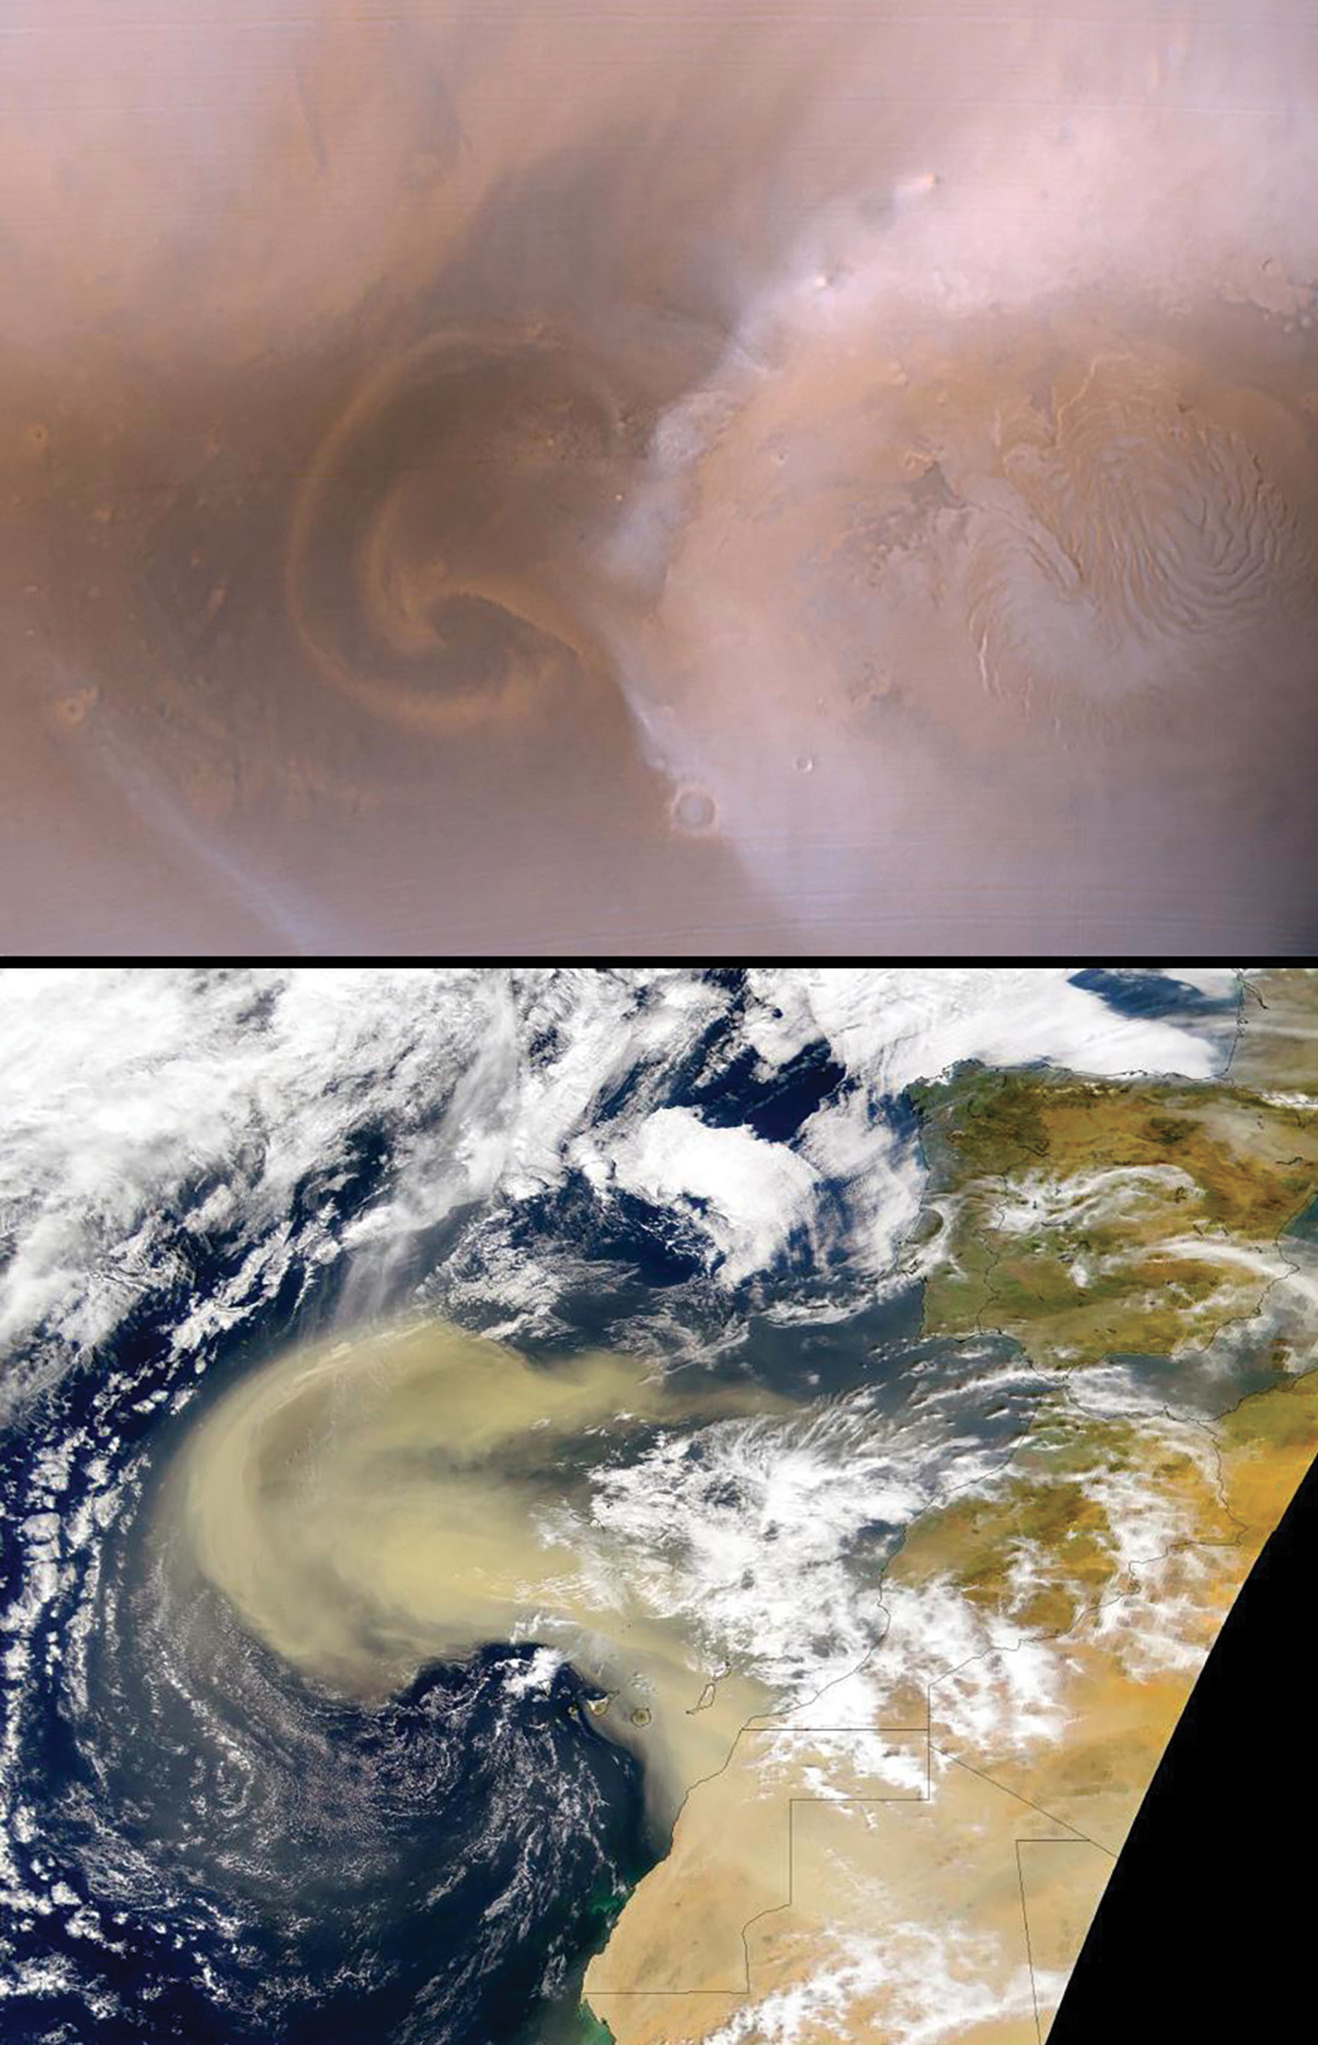 Recent Mars and Earth dust storms compared